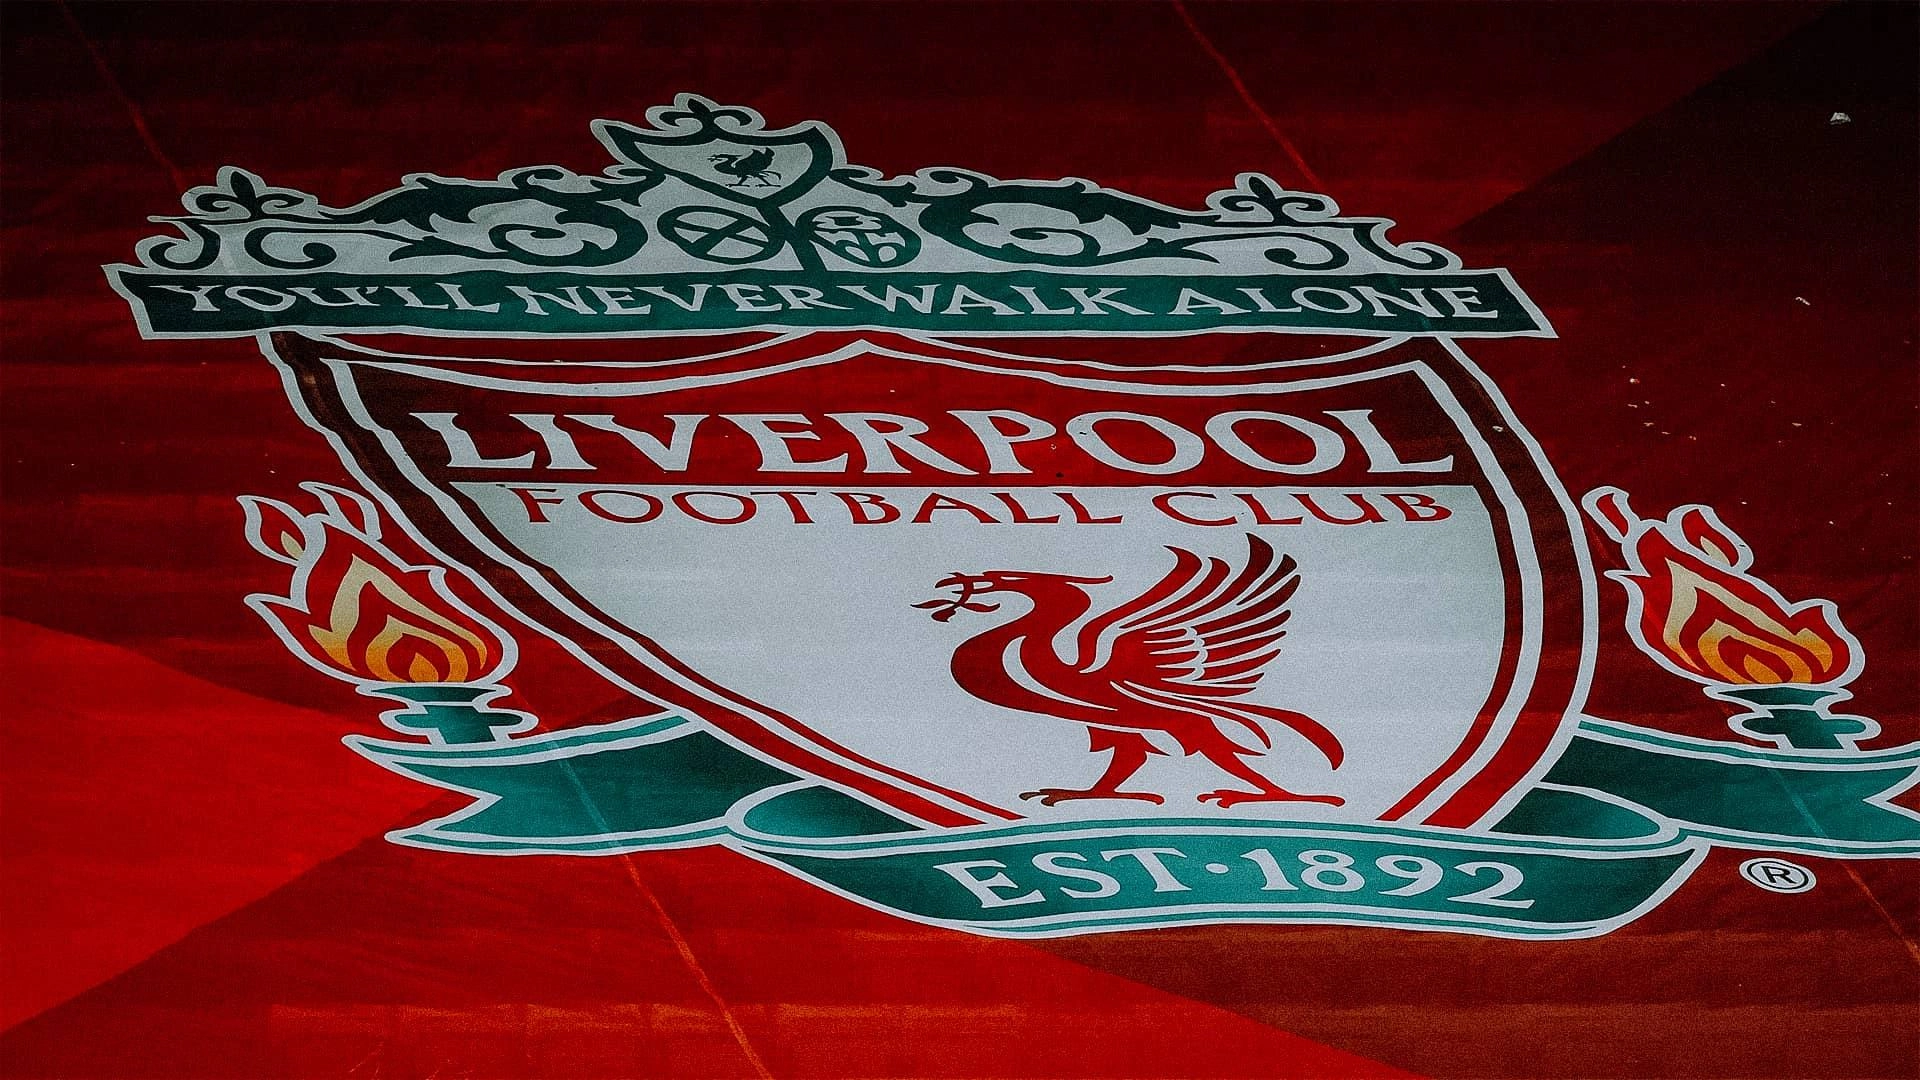 Liverpool FC fail in move to trademark the word 'Liverpool', Liverpool